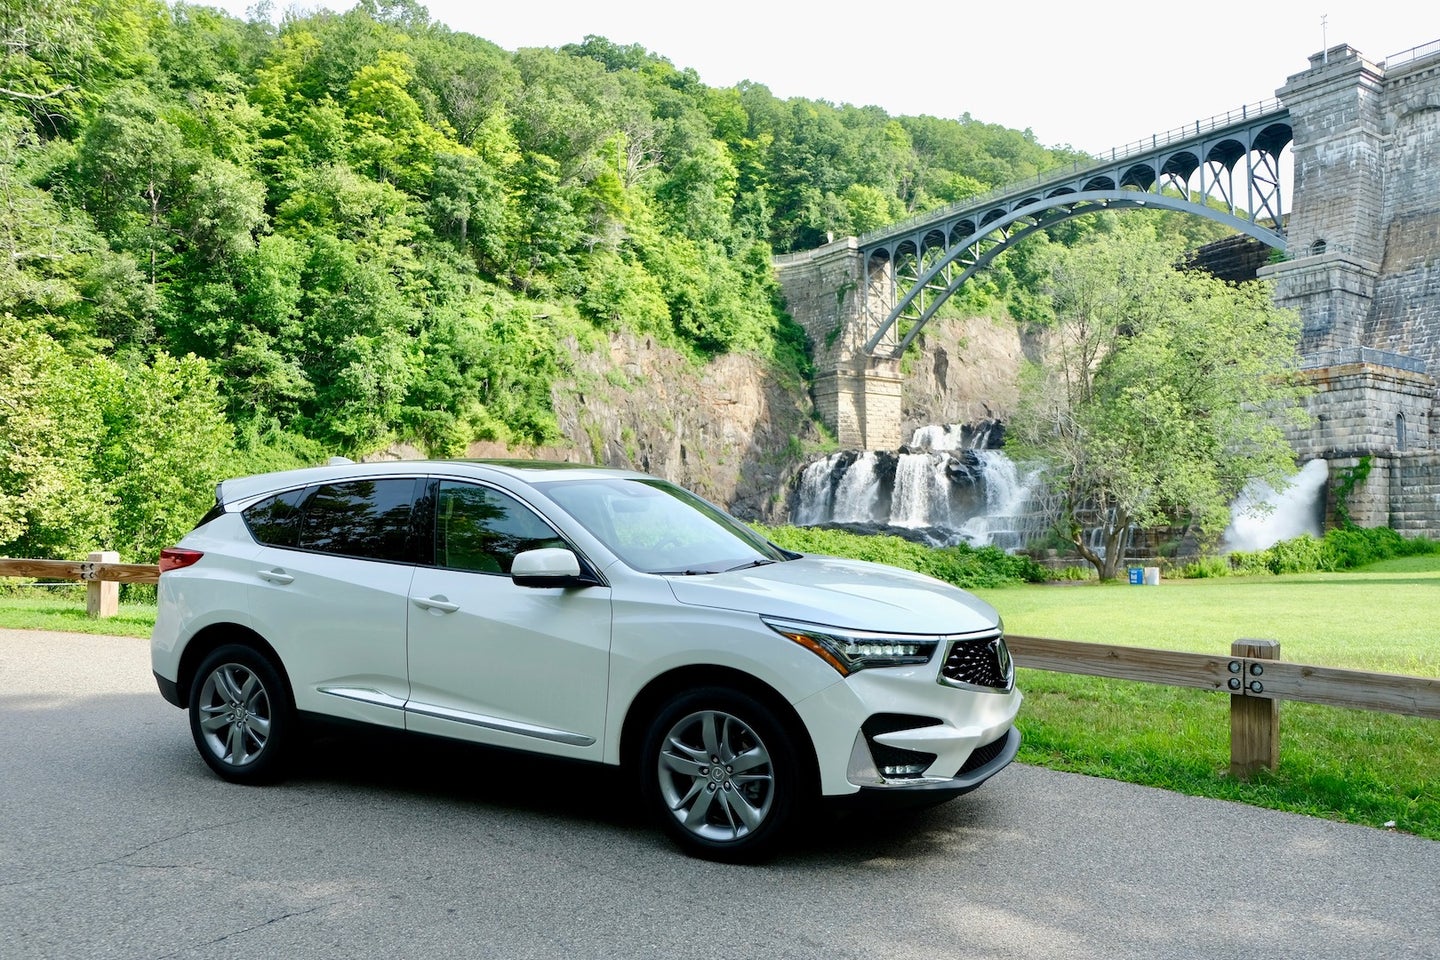 2019 Acura RDX Review: High-Tech and Brand New, But Already Winning Americans Over